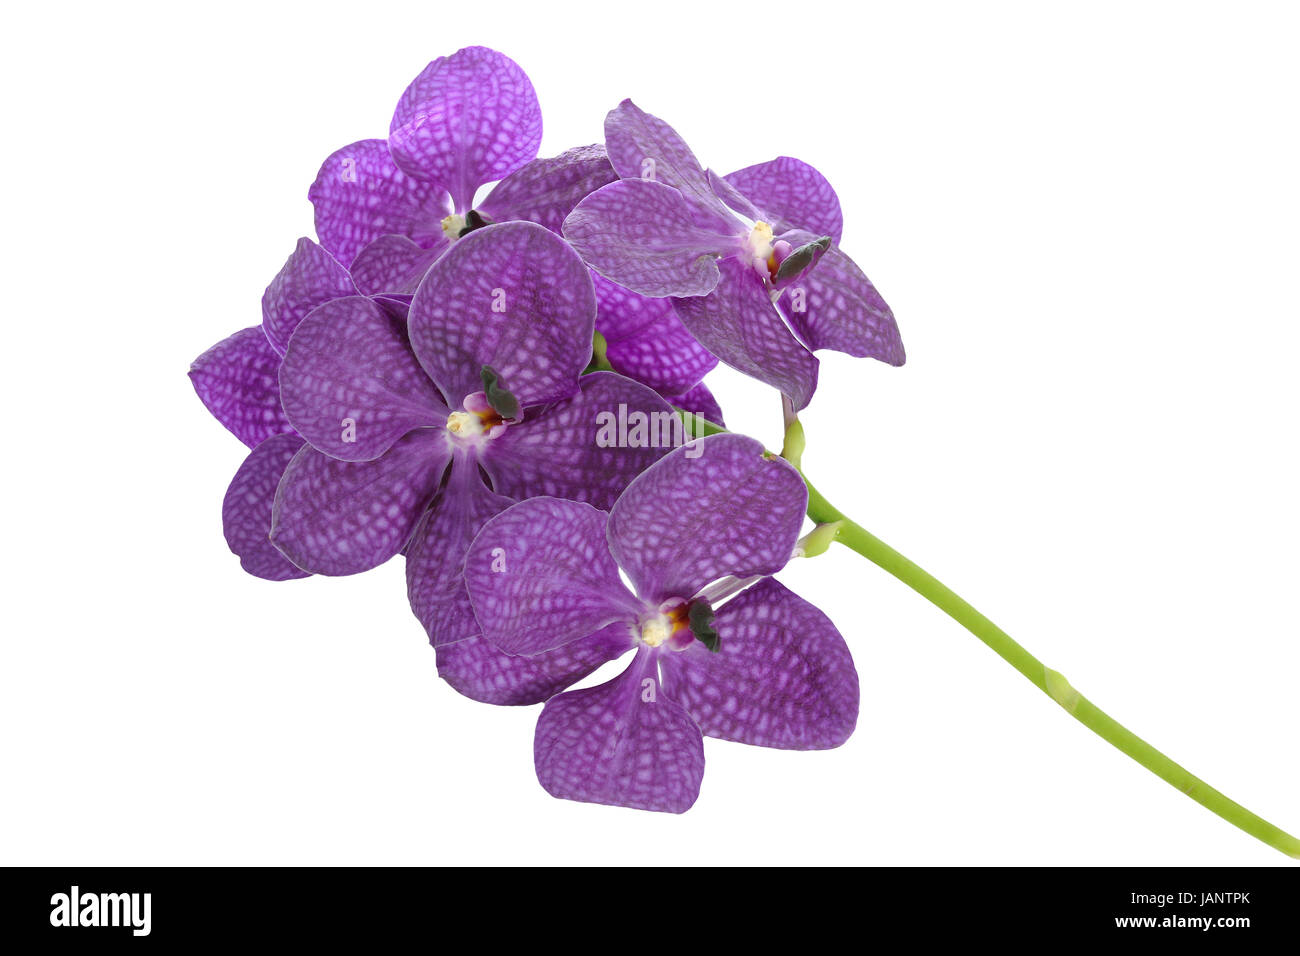 purple orchid flower isolate on white background Stock Photo